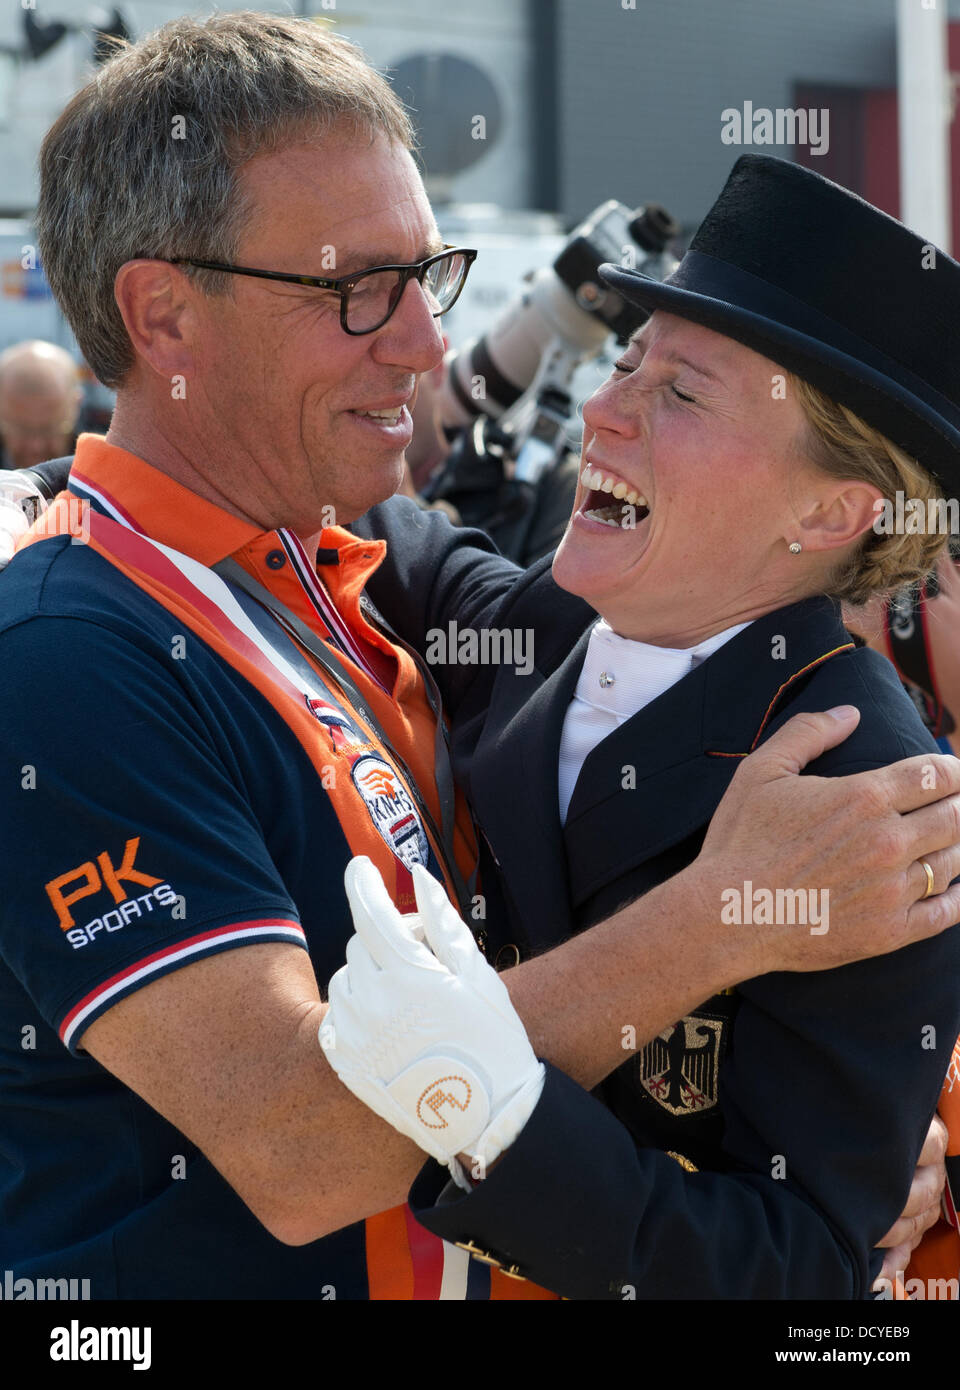 Herning, Denmark, Germany. 22nd Aug, 2013. German dressage rider Helen Langehanenberg hugs Dutch dressage coach Wim Ernes after the team competition of the FEI European Championships in Herning, Denmark, Germany, 22 August 2013. The German team finished first. Photo: Jochen Luebke/dpa/Alamy Live News Stock Photo